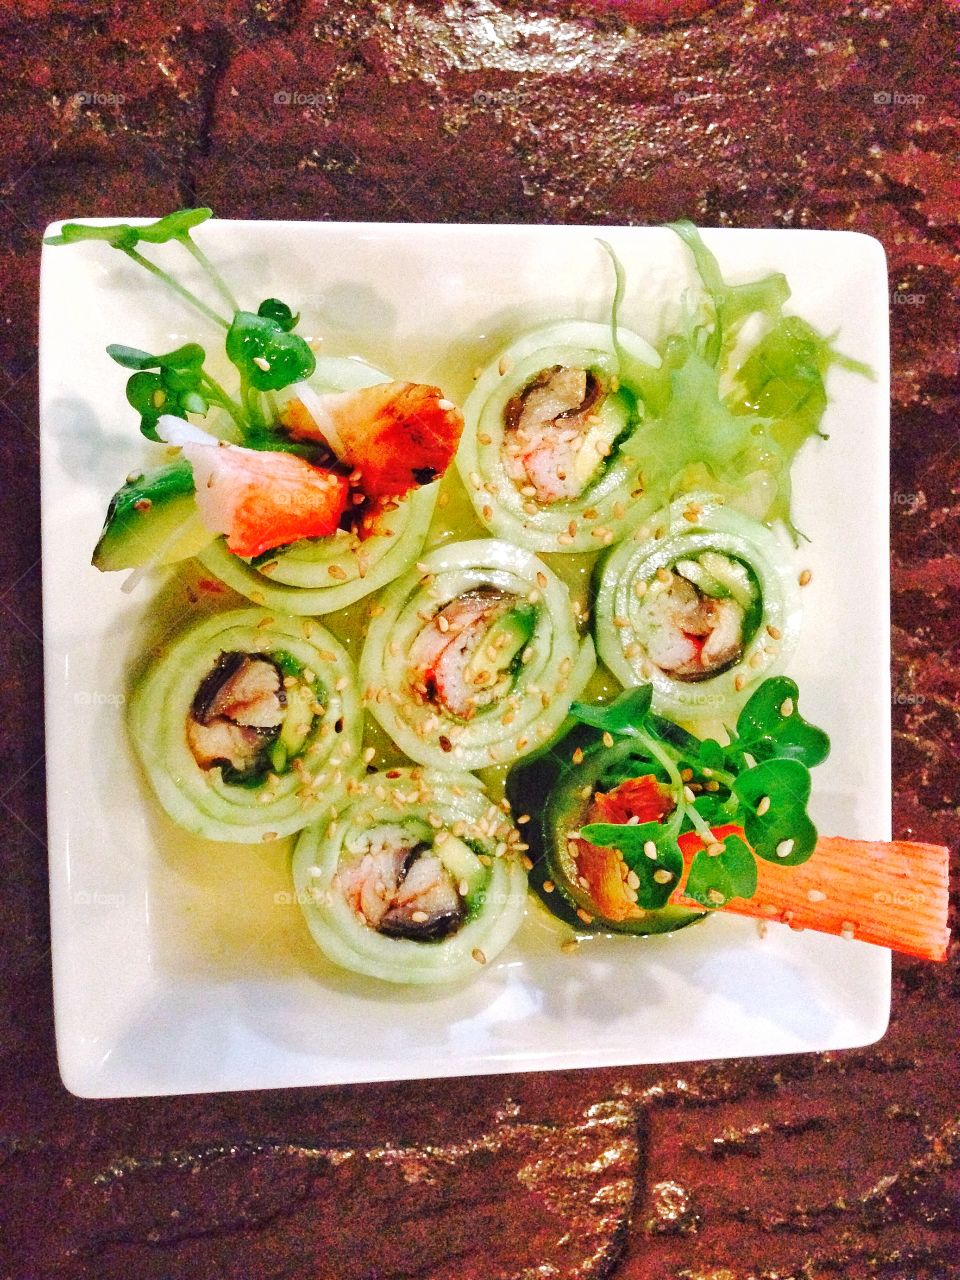 Sushi rolls with crab and avocado
